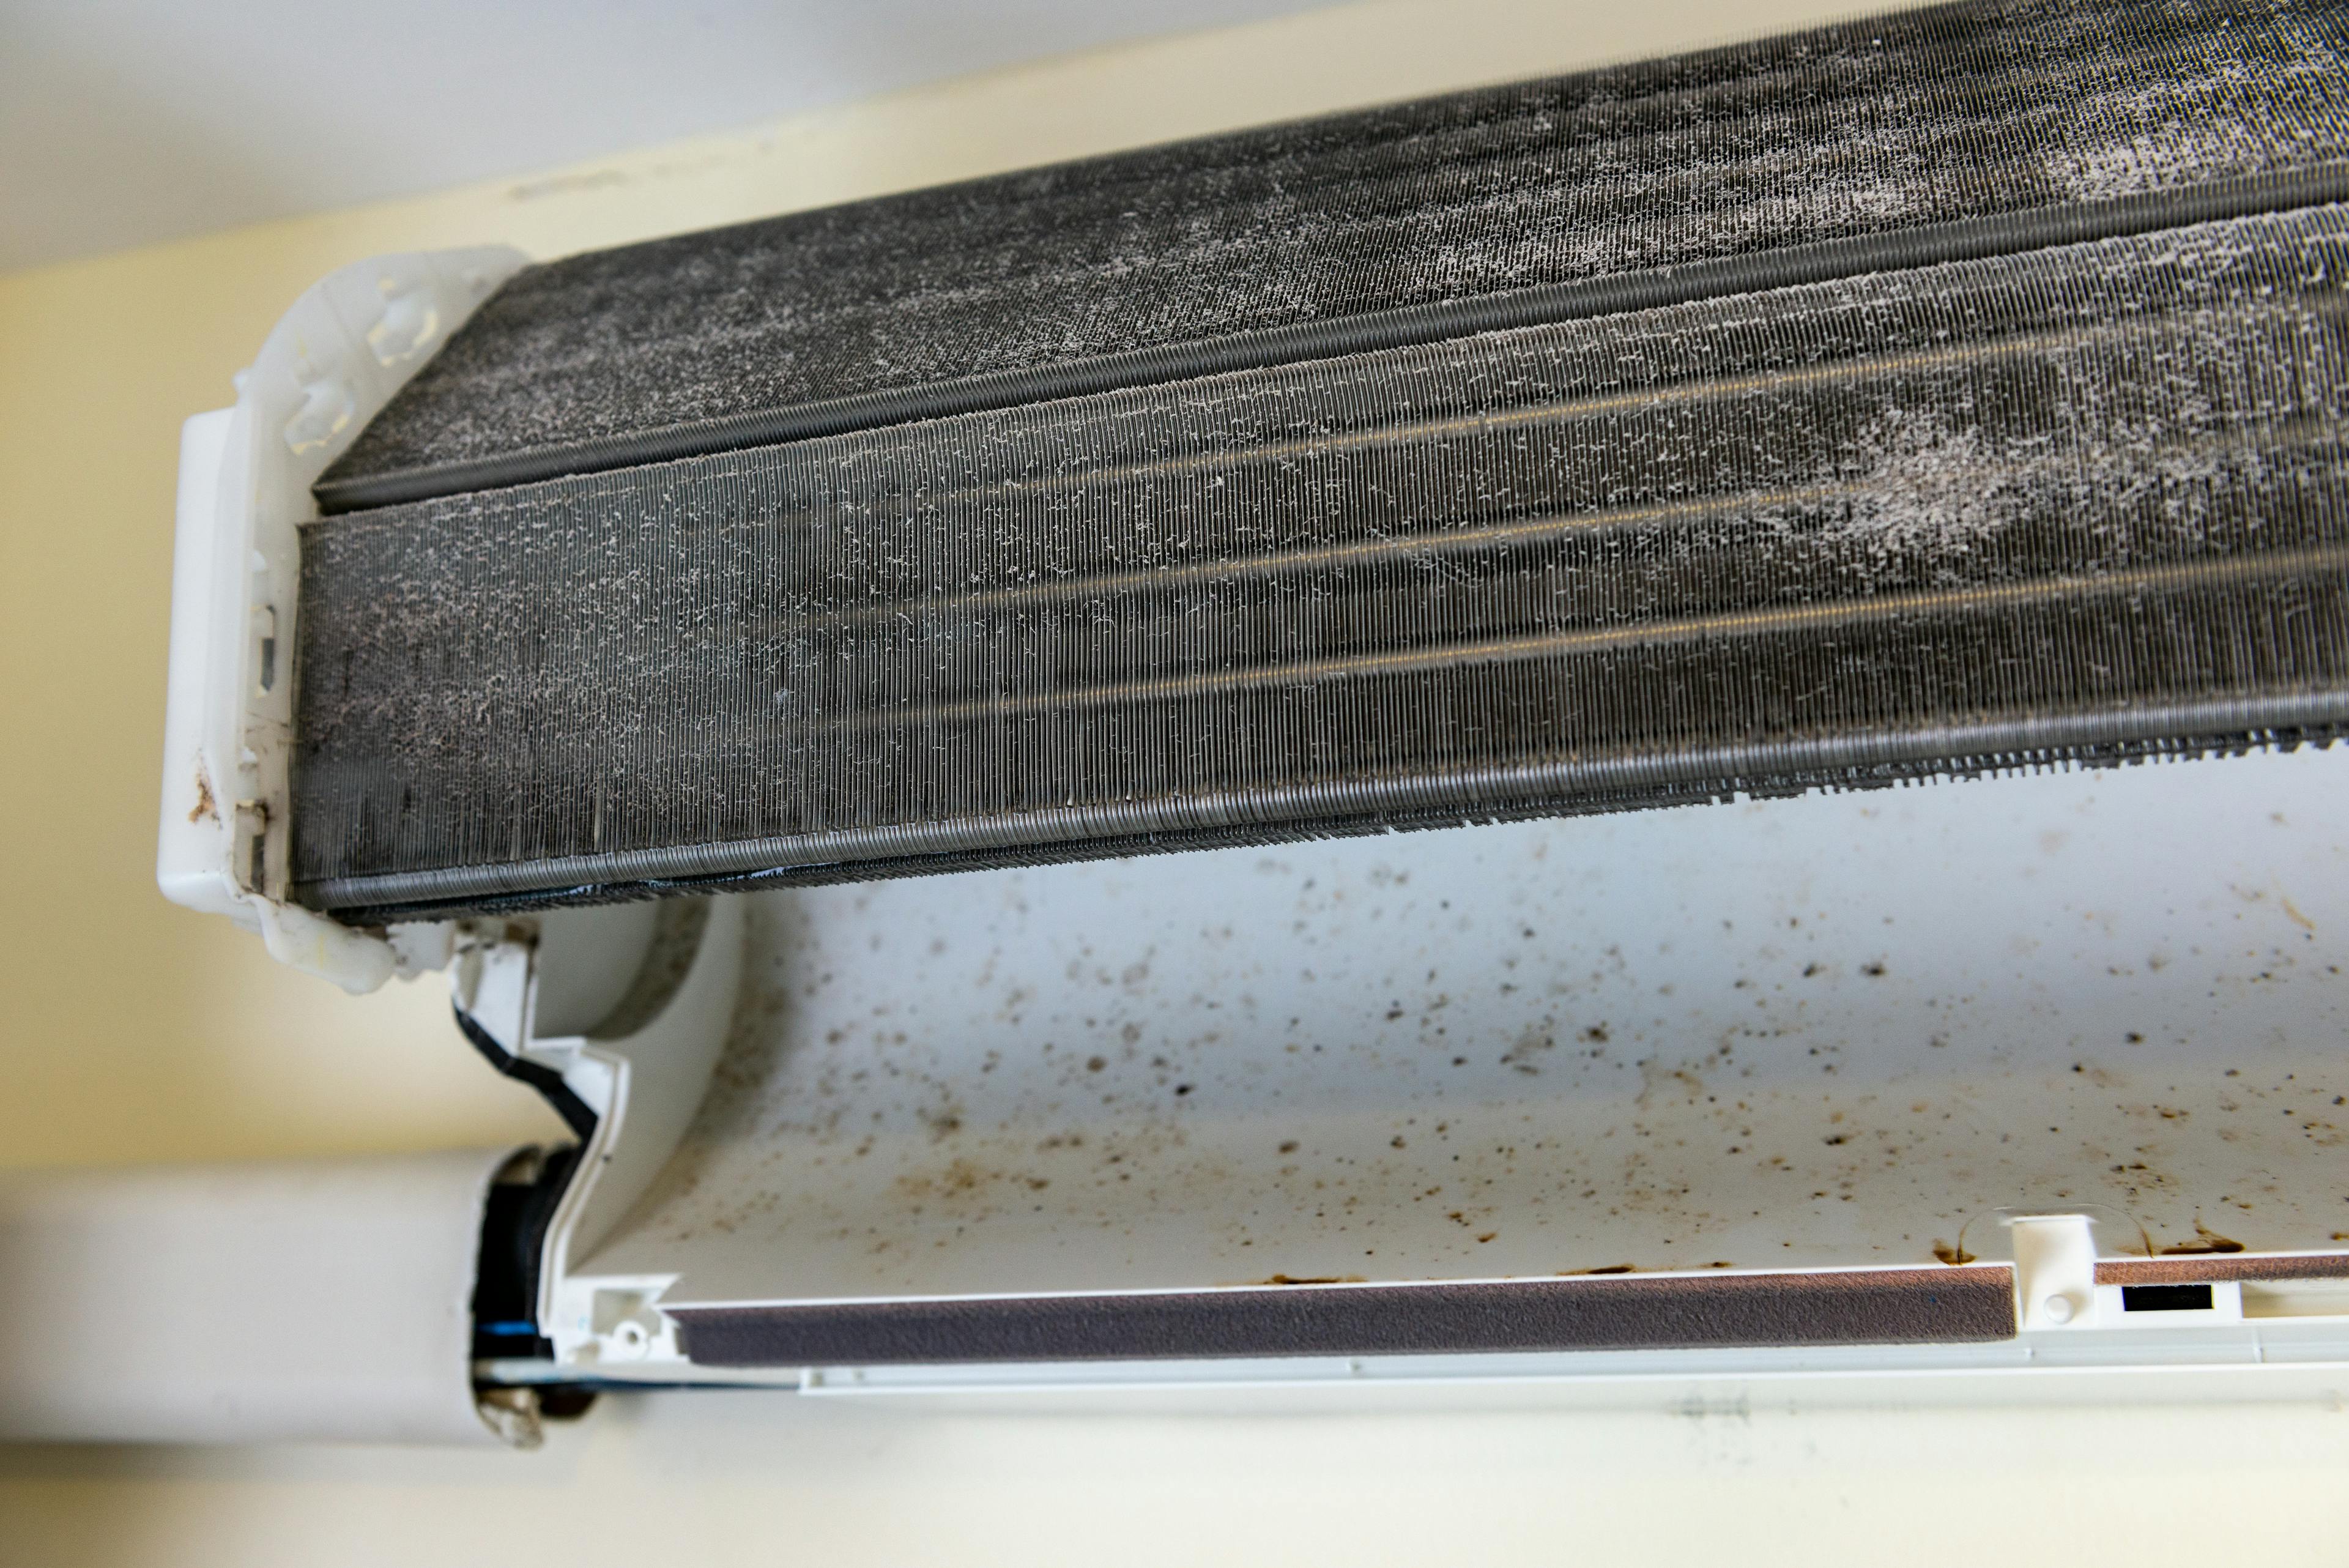 dirty aircon evaporator coil causing water leakage